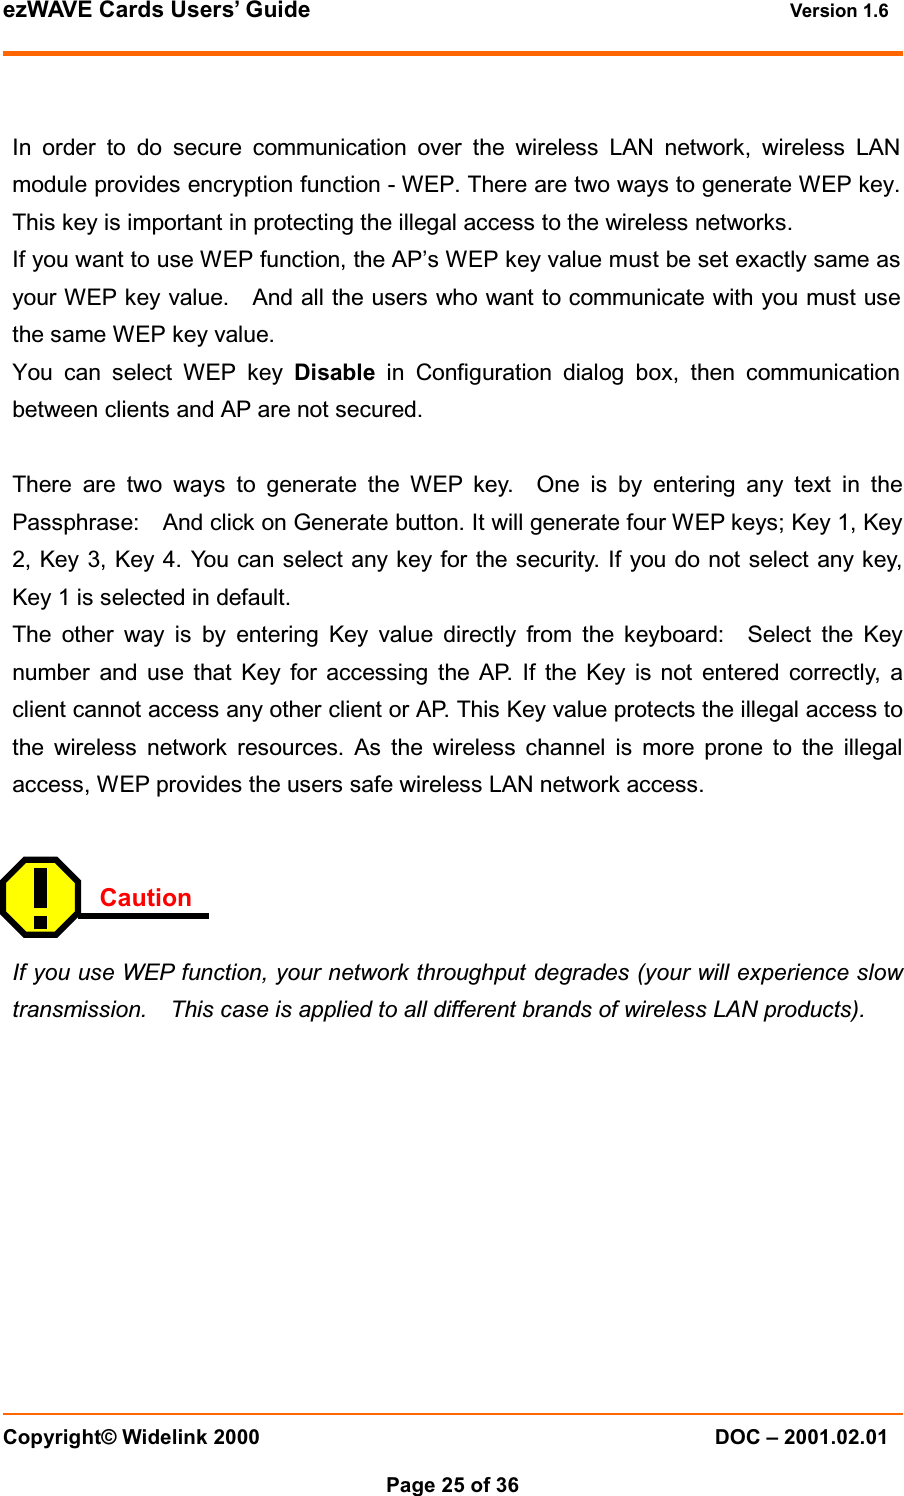 ezWAVE Cards Users’ Guide Version 1.6 Copyright© Widelink 2000 DOC – 2001.02.01Page 25 of 36  In order to do secure communication over the wireless LAN network, wireless LANmodule provides encryption function - WEP. There are two ways to generate WEP key.This key is important in protecting the illegal access to the wireless networks.If you want to use WEP function, the AP’s WEP key value must be set exactly same asyour WEP key value. And all the users who want to communicate with you must usethe same WEP key value.You can select WEP key Disable in Configuration dialog box, then communicationbetween clients and AP are not secured.There are two ways to generate the WEP key. One is by entering any text in thePassphrase: And click on Generate button. It will generate four WEP keys; Key 1, Key2, Key 3, Key 4. You can select any key for the security. If you do not select any key,Key 1 is selected in default.The other way is by entering Key value directly from the keyboard: Select the Keynumber and use that Key for accessing the AP. If the Key is not entered correctly, aclient cannot access any other client or AP. This Key value protects the illegal access tothe wireless network resources. As the wireless channel is more prone to the illegalaccess, WEP provides the users safe wireless LAN network access.CautionIf you use WEP function, your network throughput degrades (your will experience slowtransmission. This case is applied to all different brands of wireless LAN products).